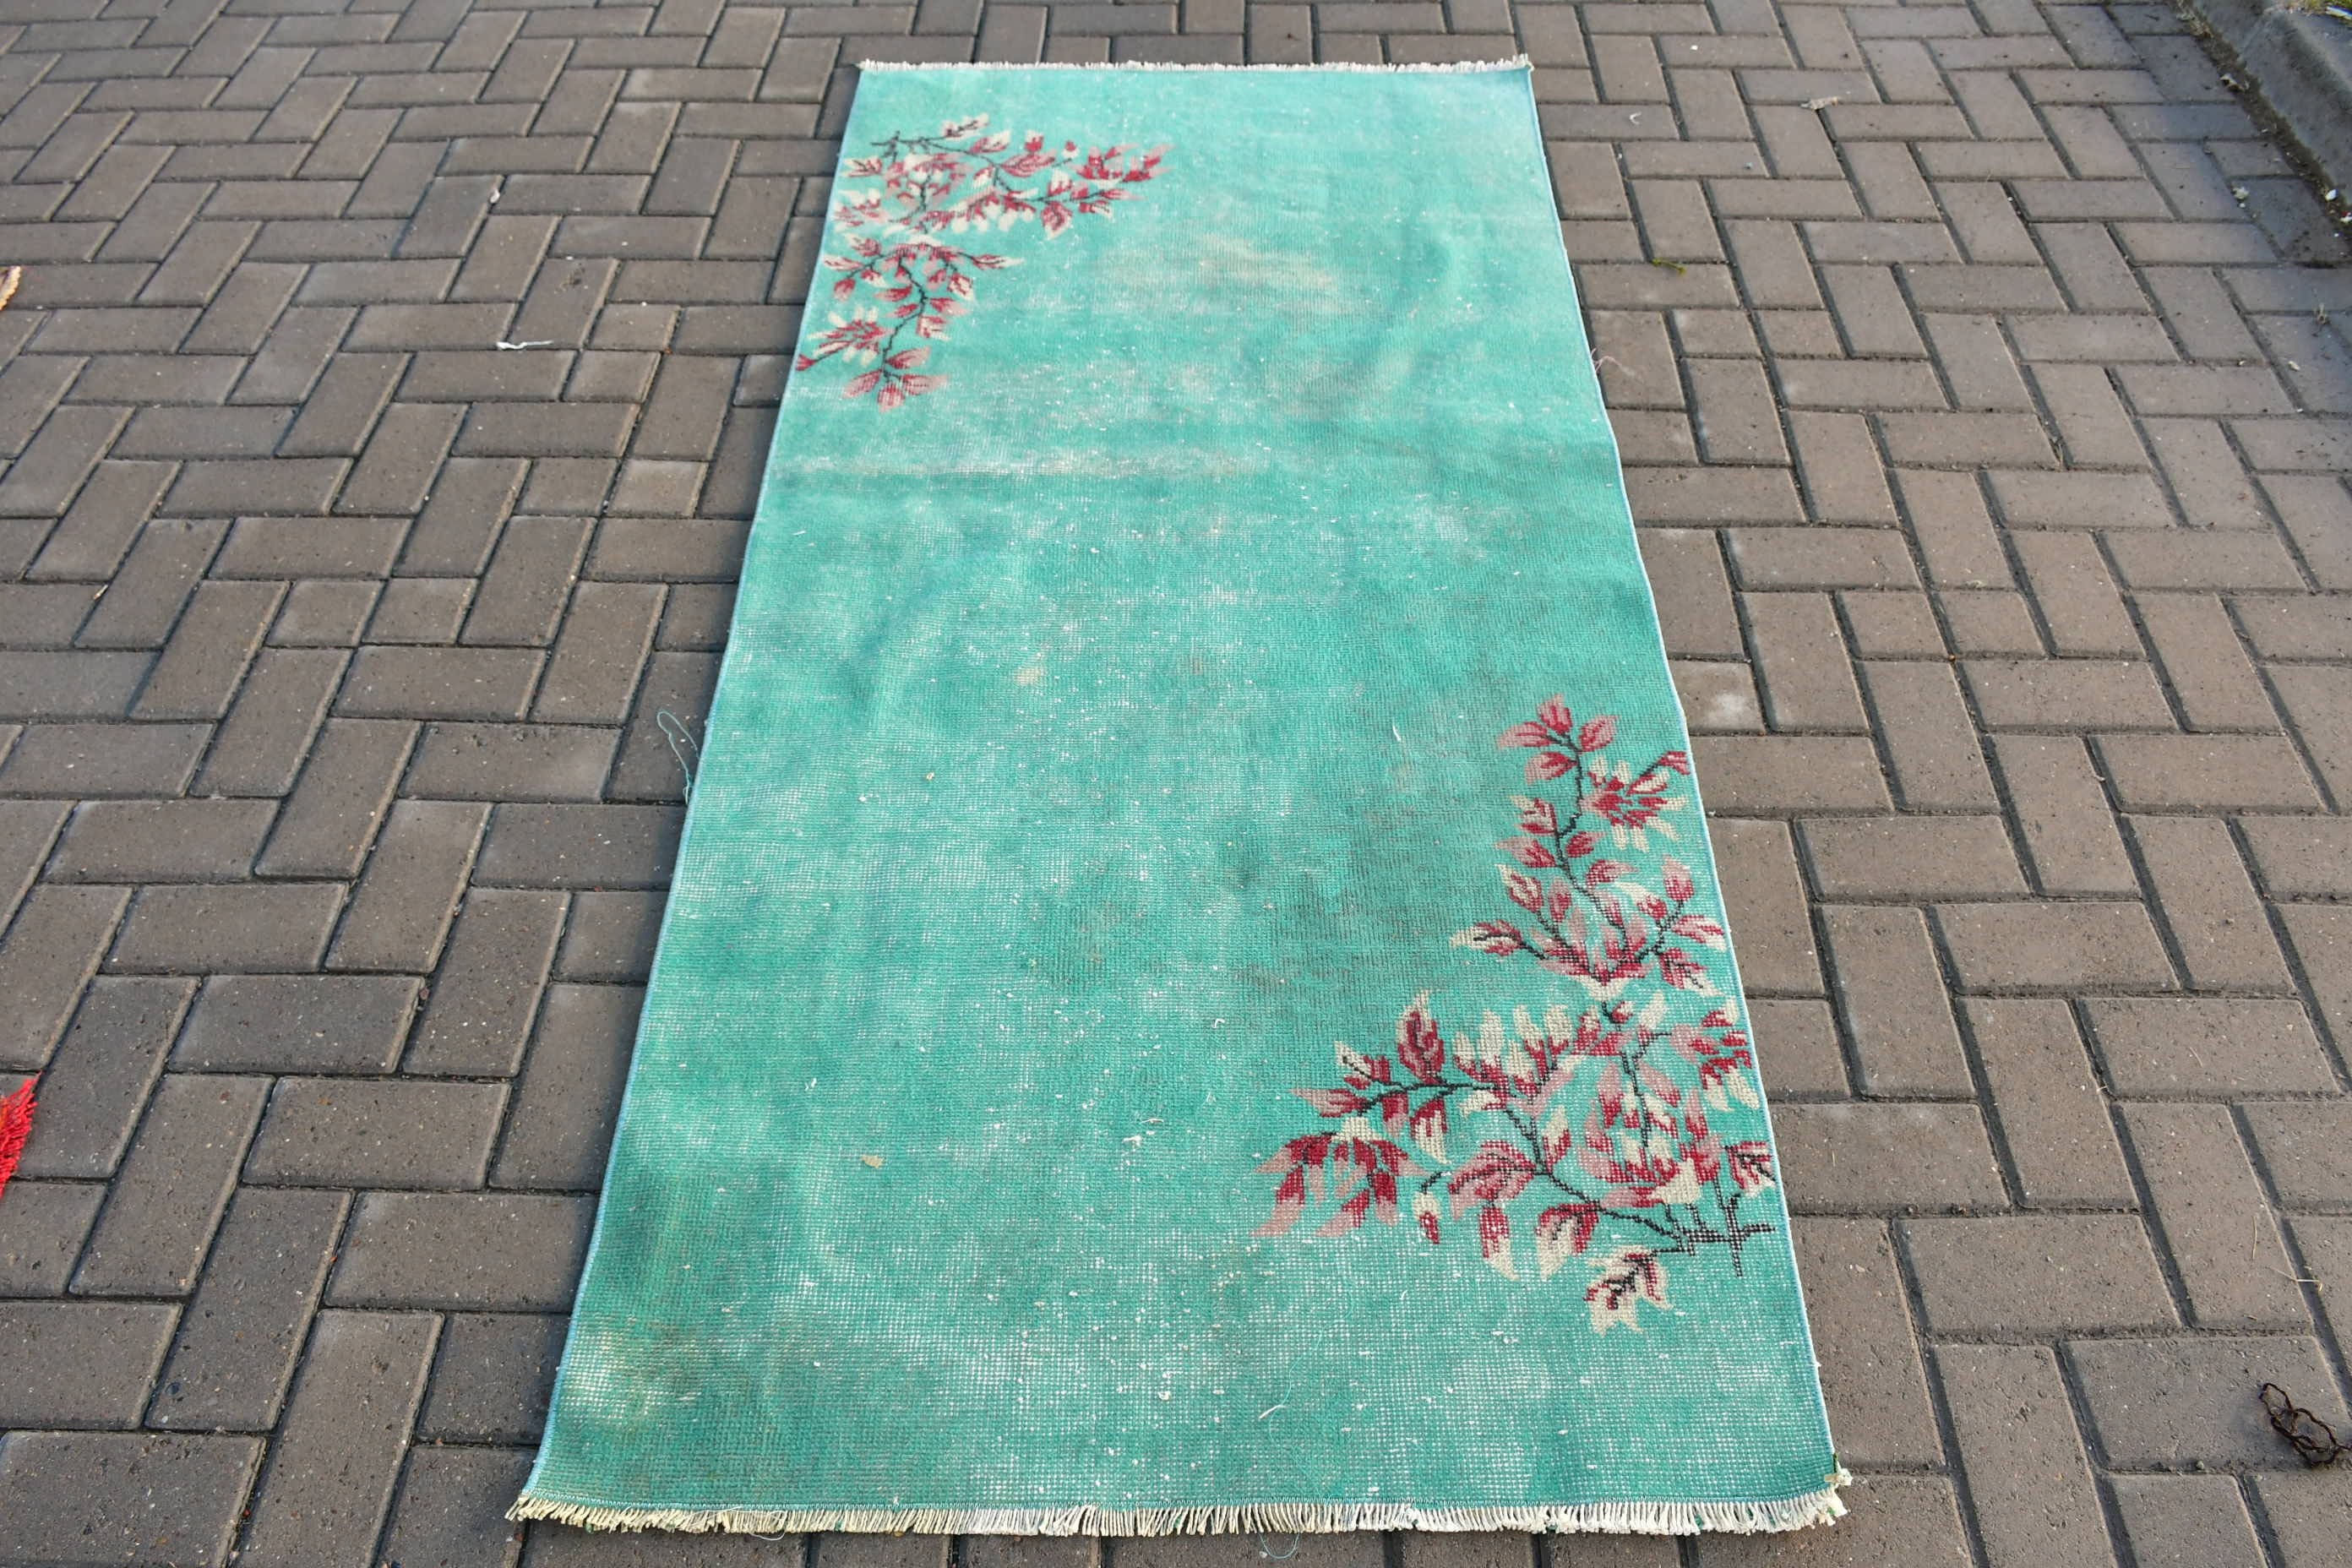 Turkish Rug, Entry Rugs, Rugs for Entry, Cool Rugs, 3.2x6.6 ft Accent Rug, Vintage Rugs, Bedroom Rug, Floor Rug, Green Kitchen Rugs